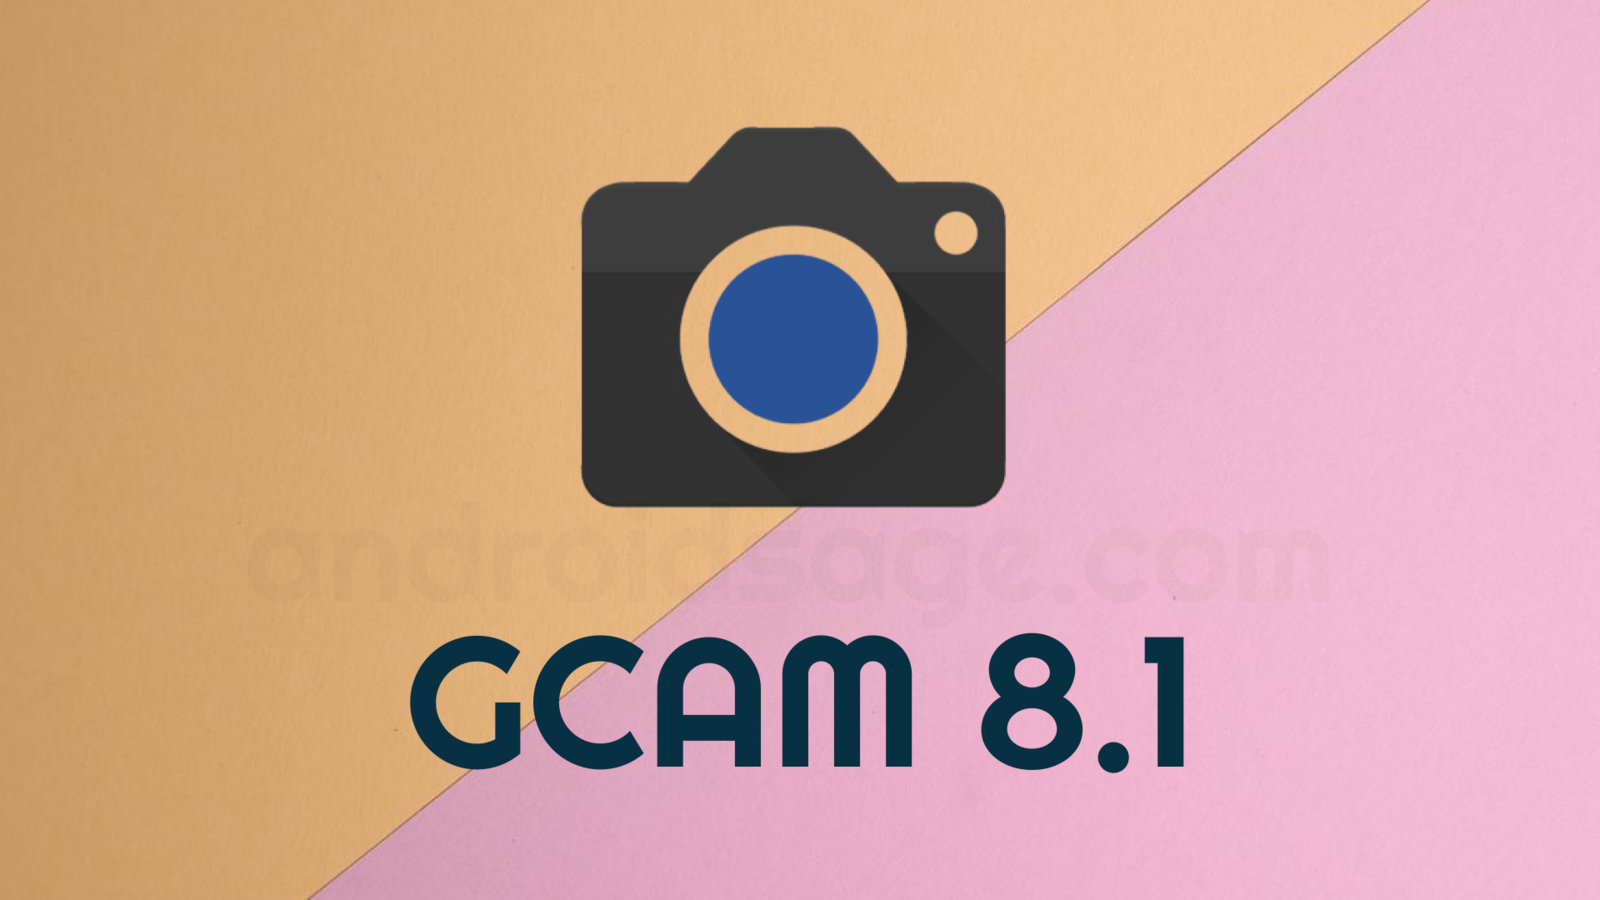 Download GCAM 8.1 APK for all Android phones with Config Files